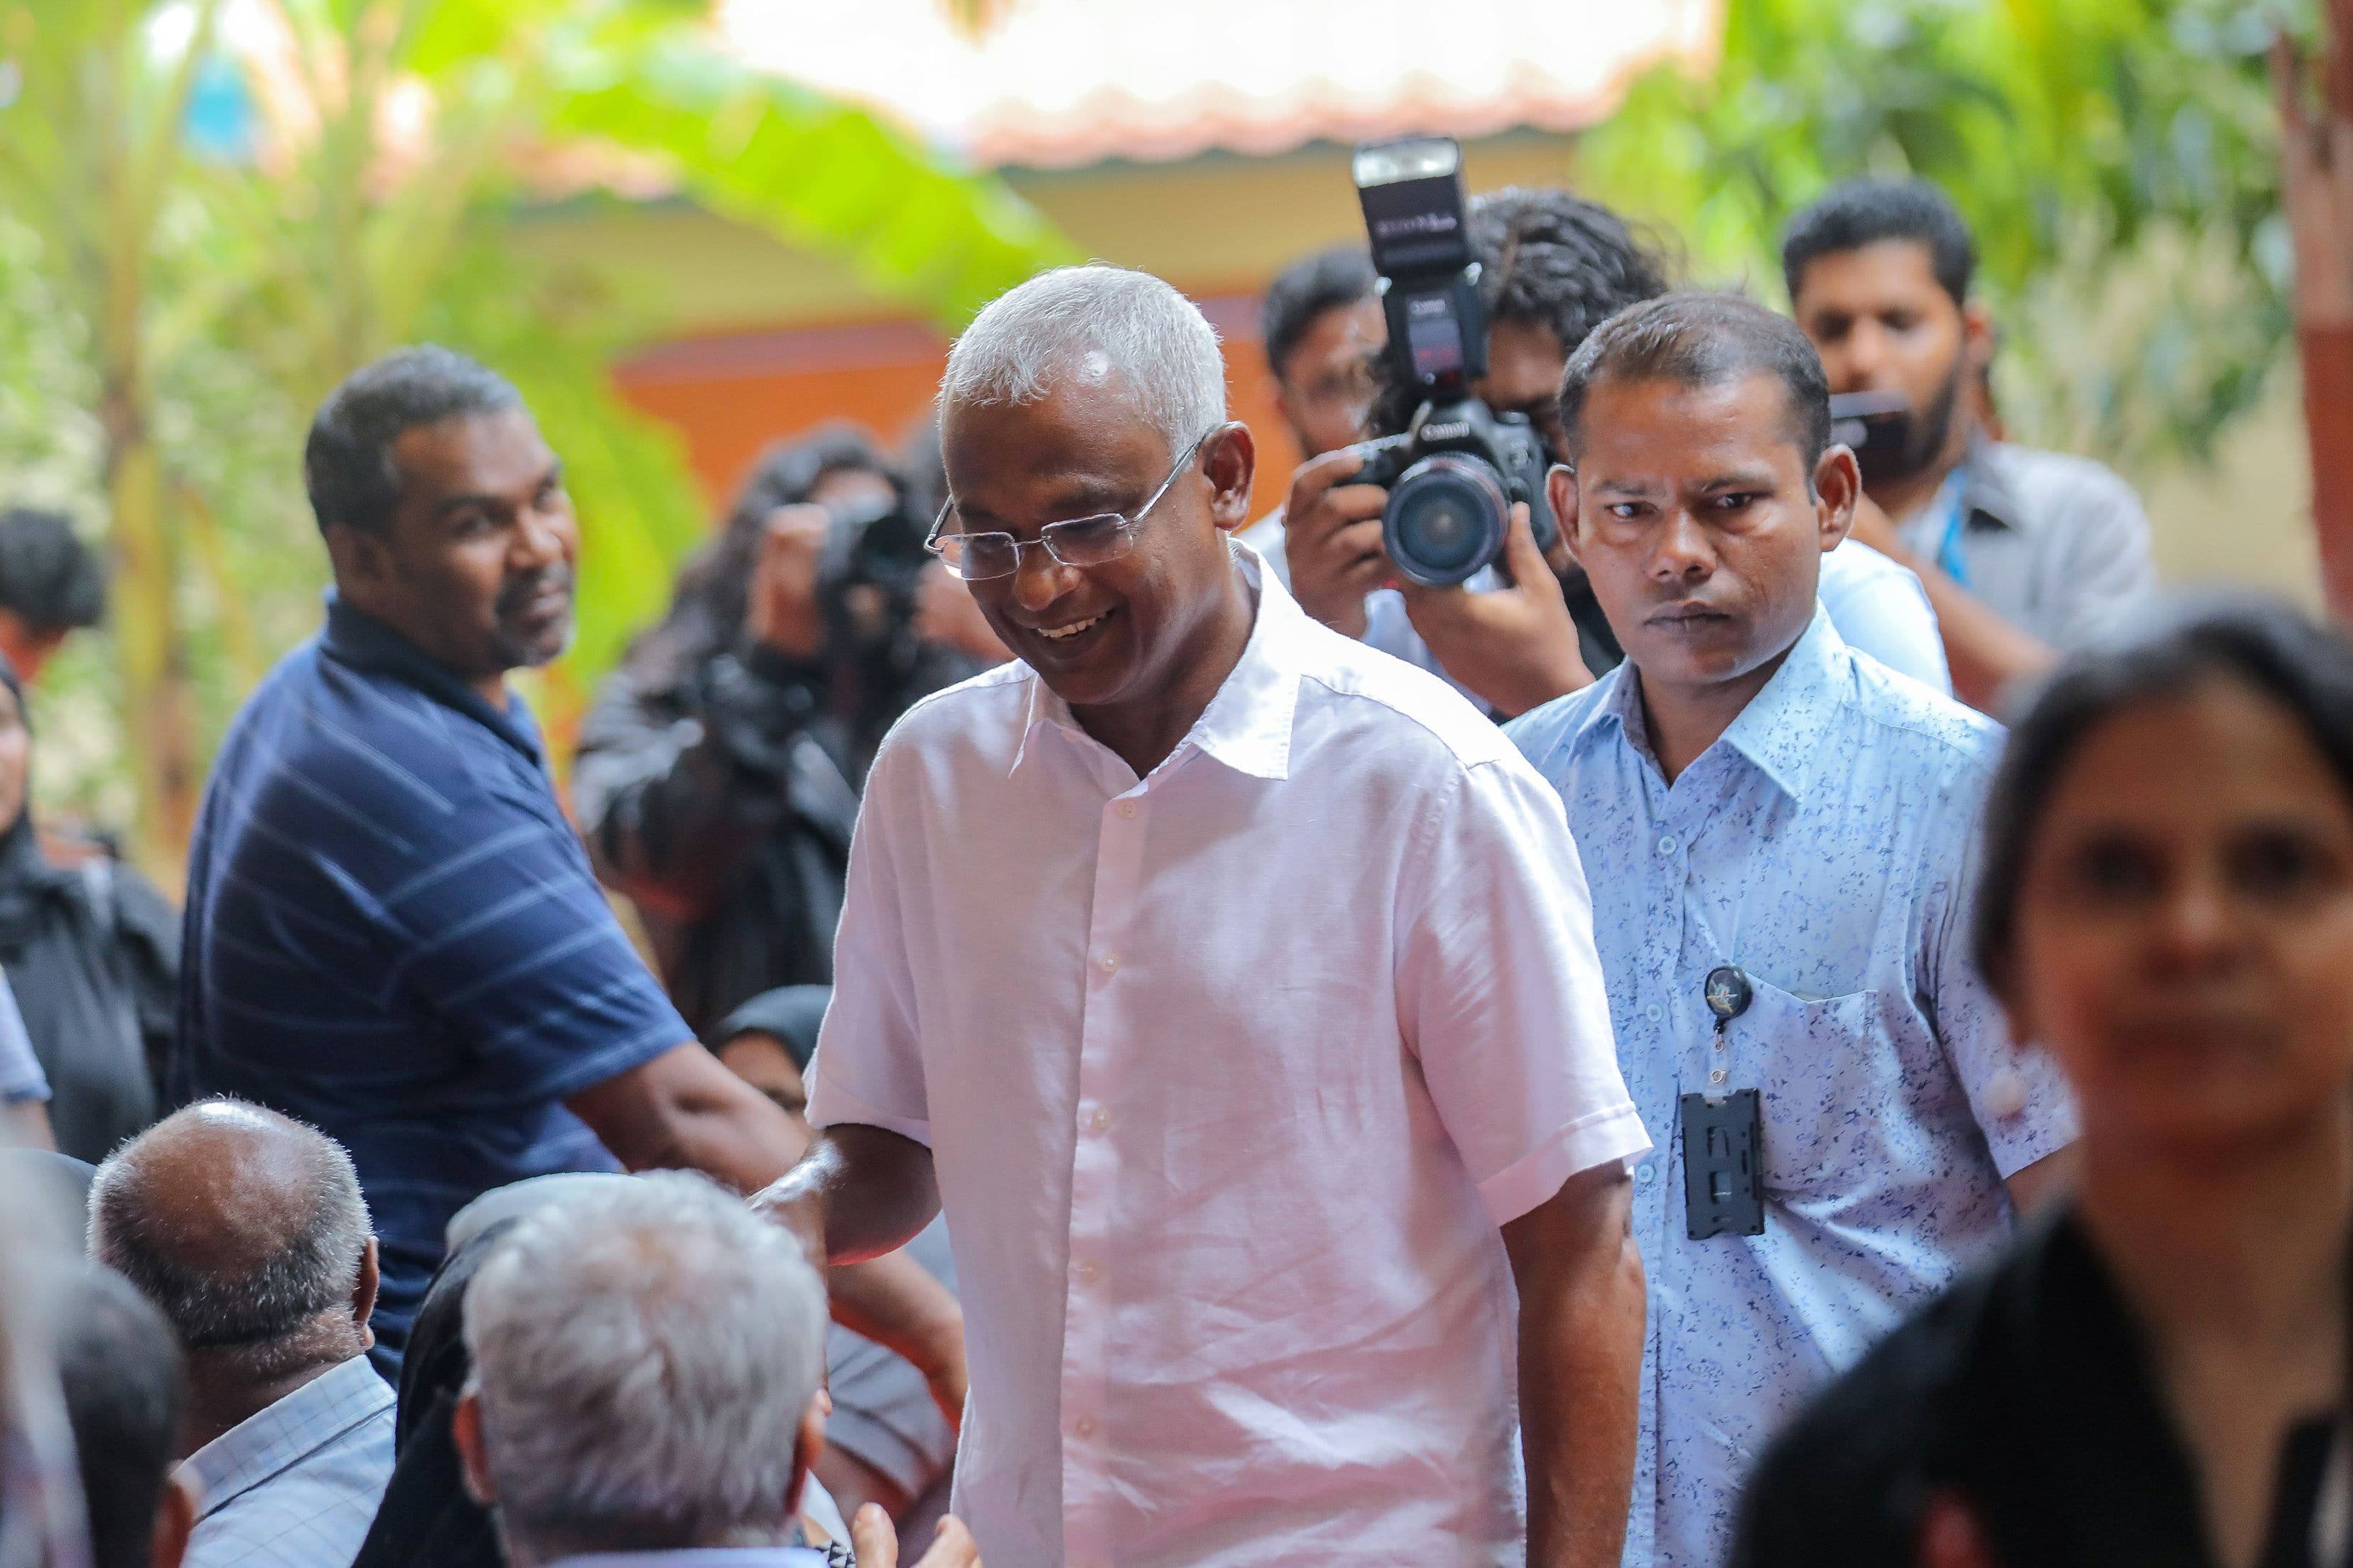 Maldives presidential polls opposition leader Solih wins pro-China leader Yameen ousted